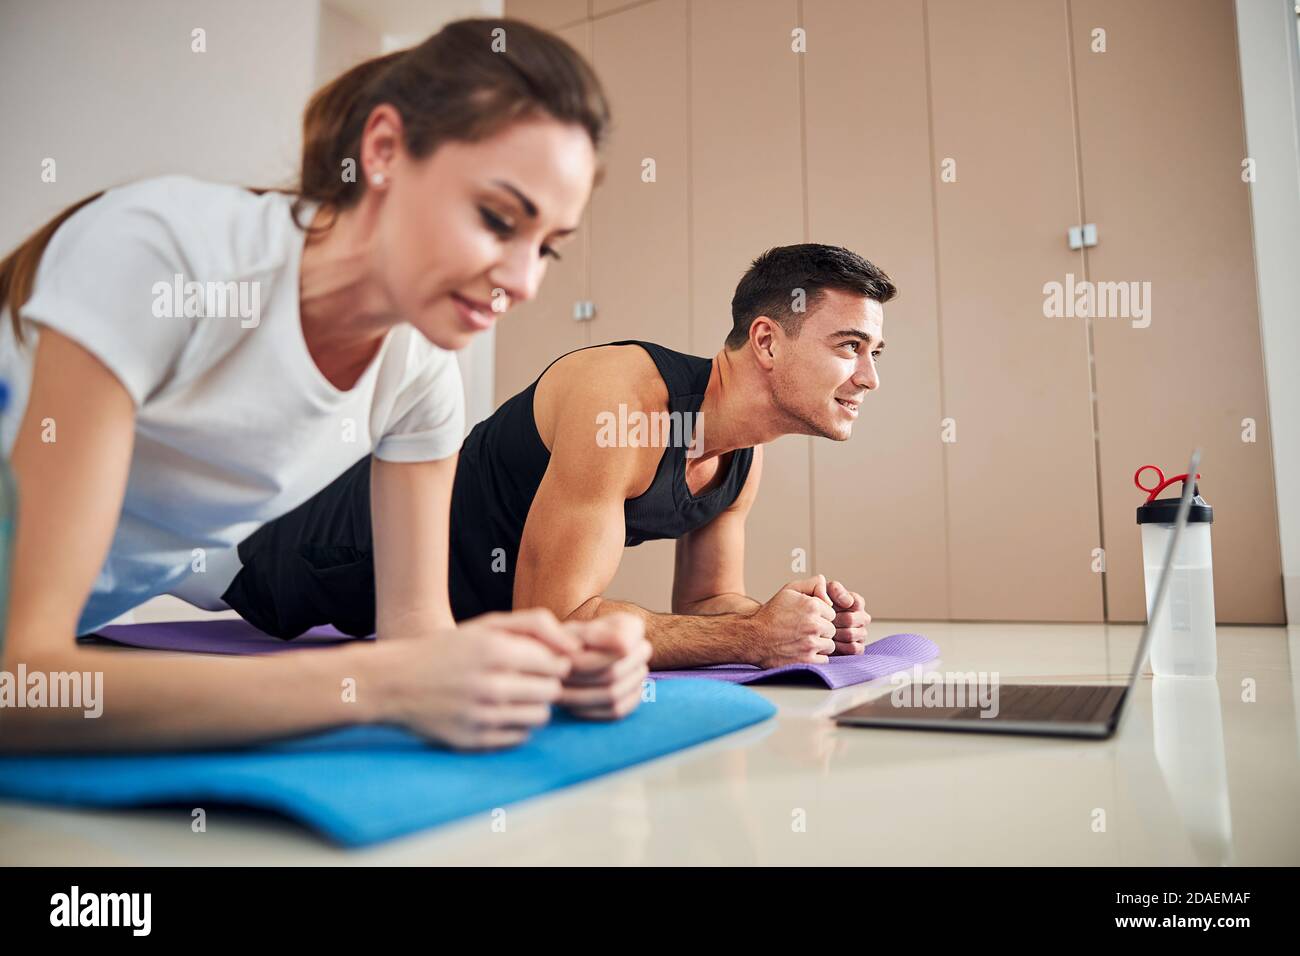 Fit couple standing in plank position while working out Stock Photo